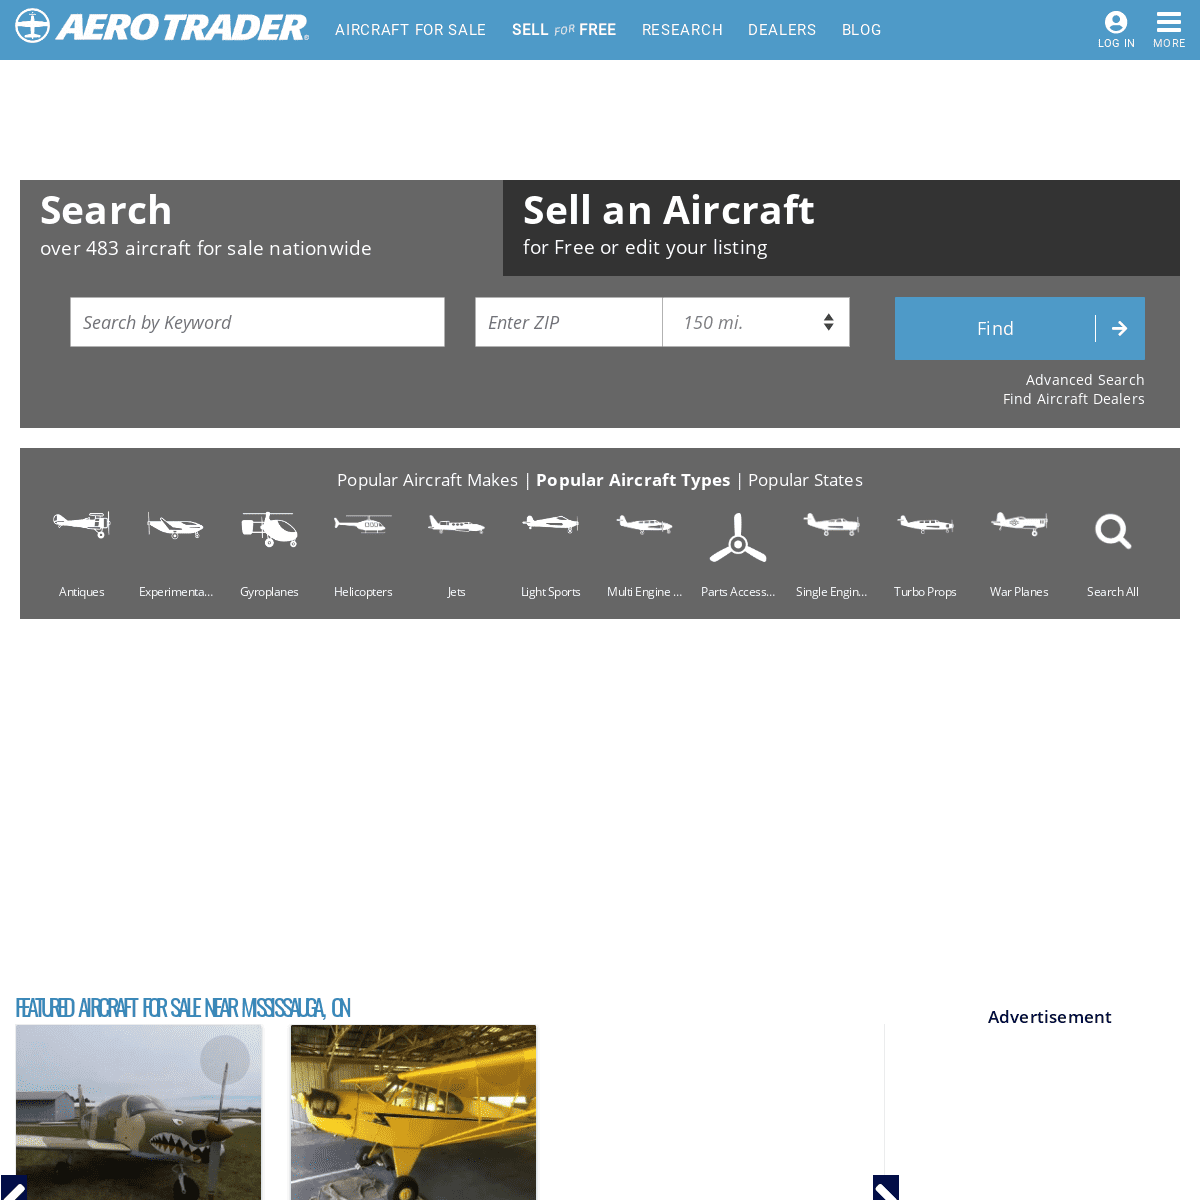 Aircraft For Sale On Aero Trader® | Buy or Sell Aircraft | New or Used Cessna, Beechcraft Aircraft for Sale at AeroTrader.com